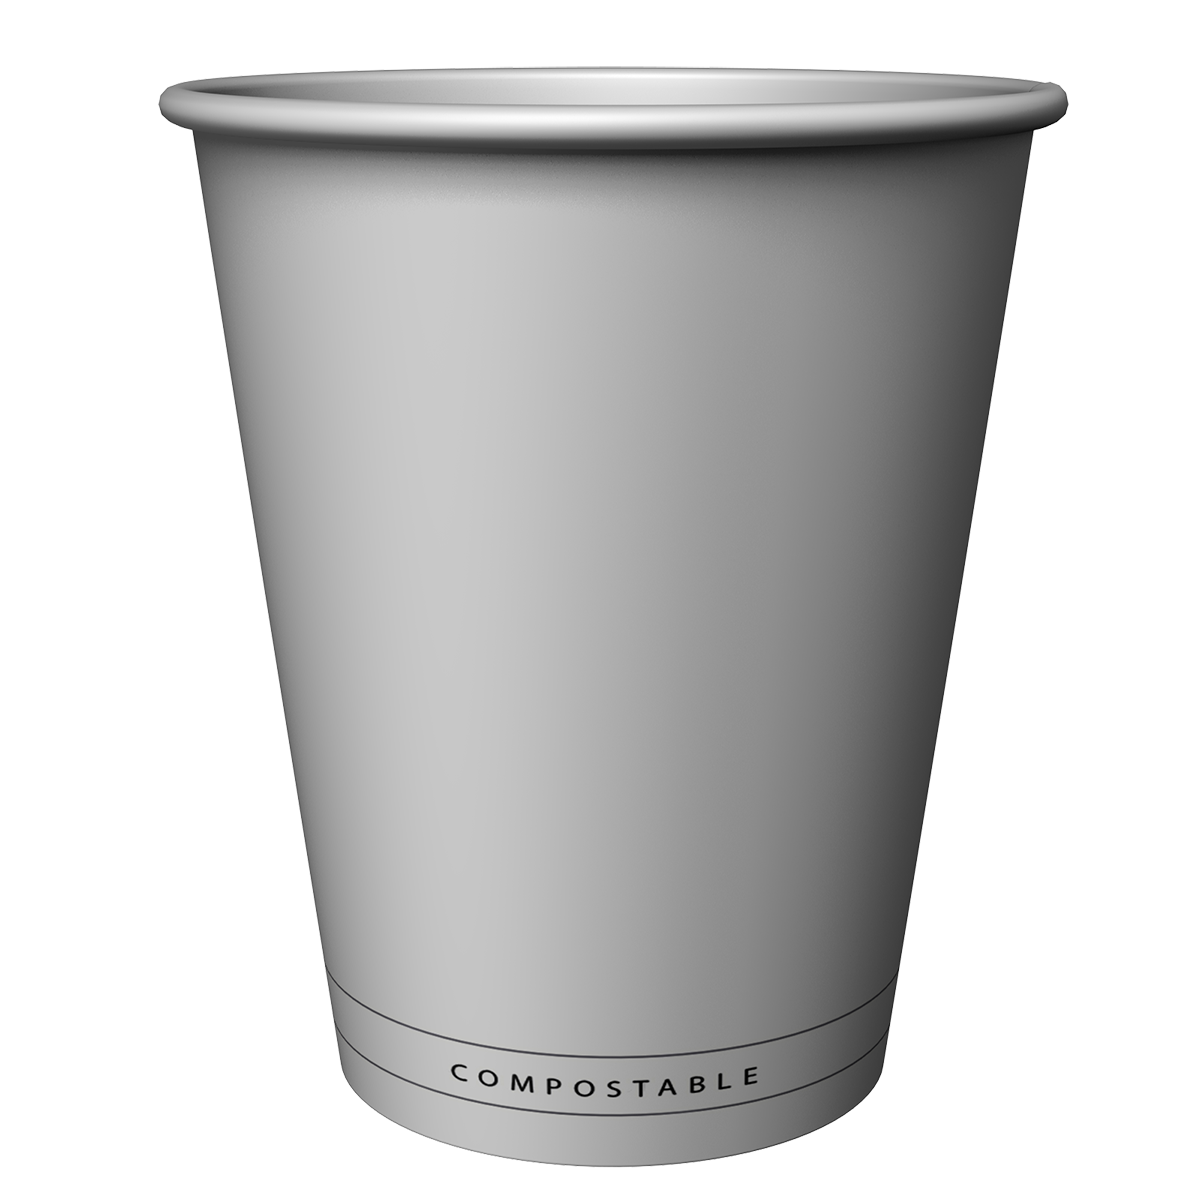 https://www.lifeingreen.com/wp-content/uploads/2021/03/Compostable-12oz-front.png